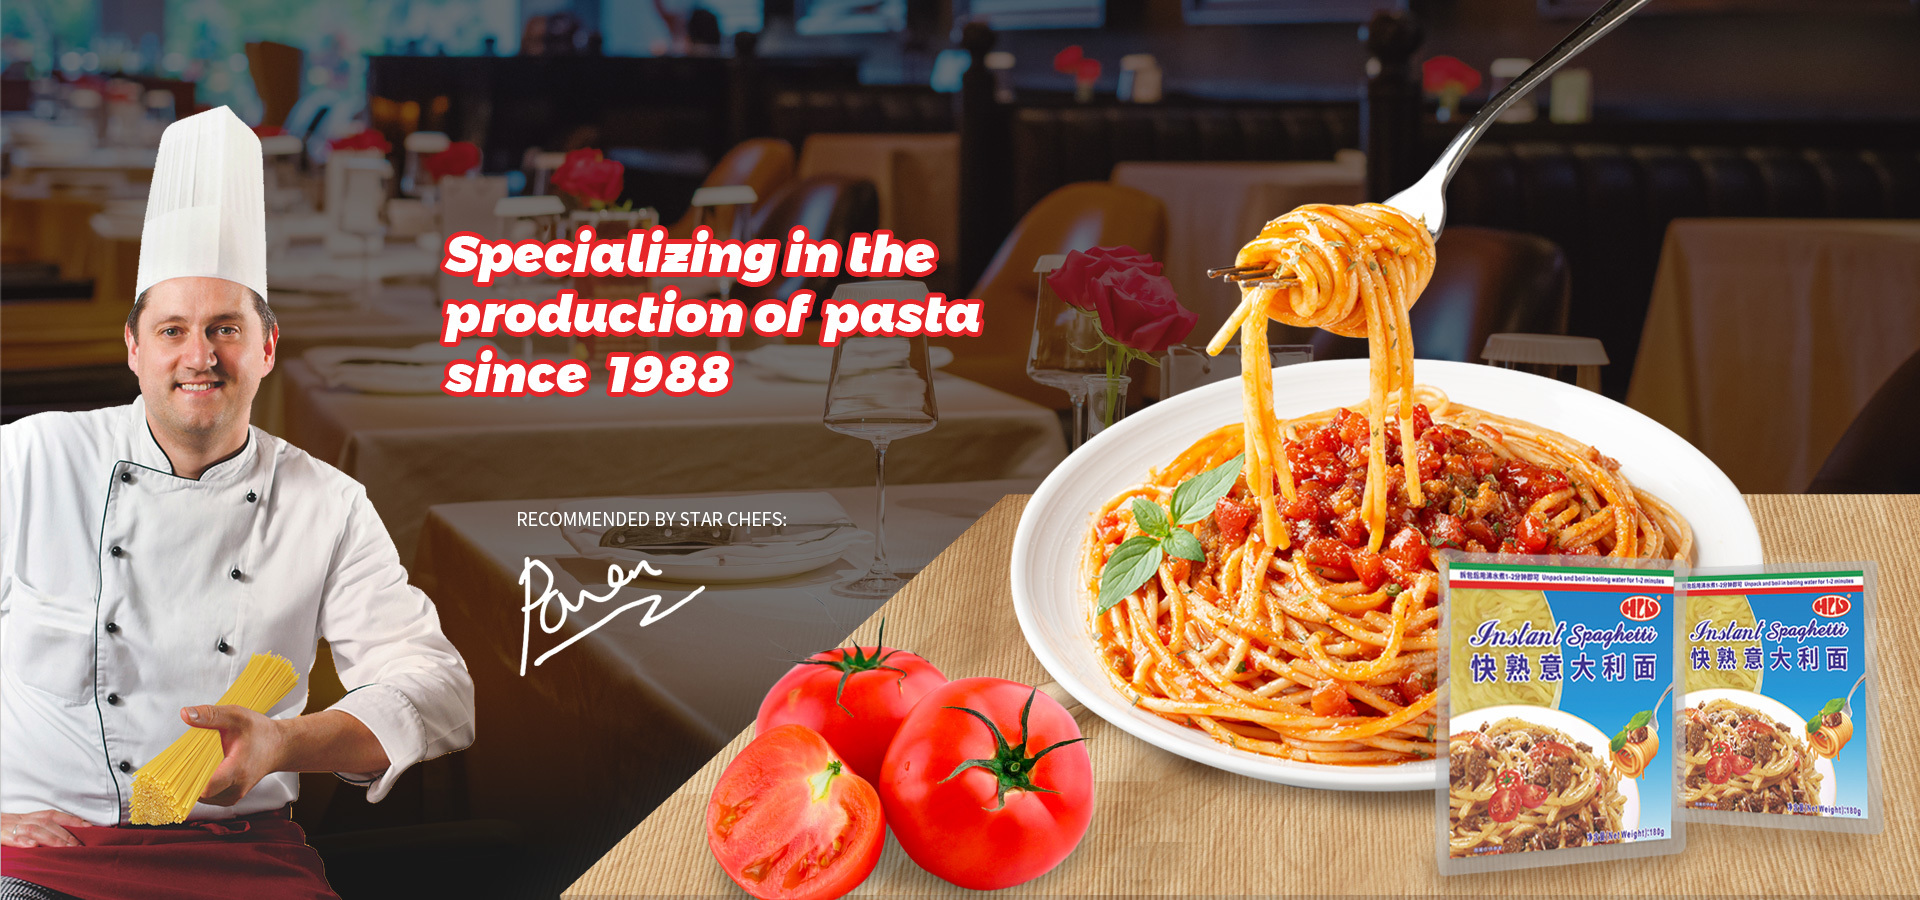 Specializing in the production of pasta since 1988